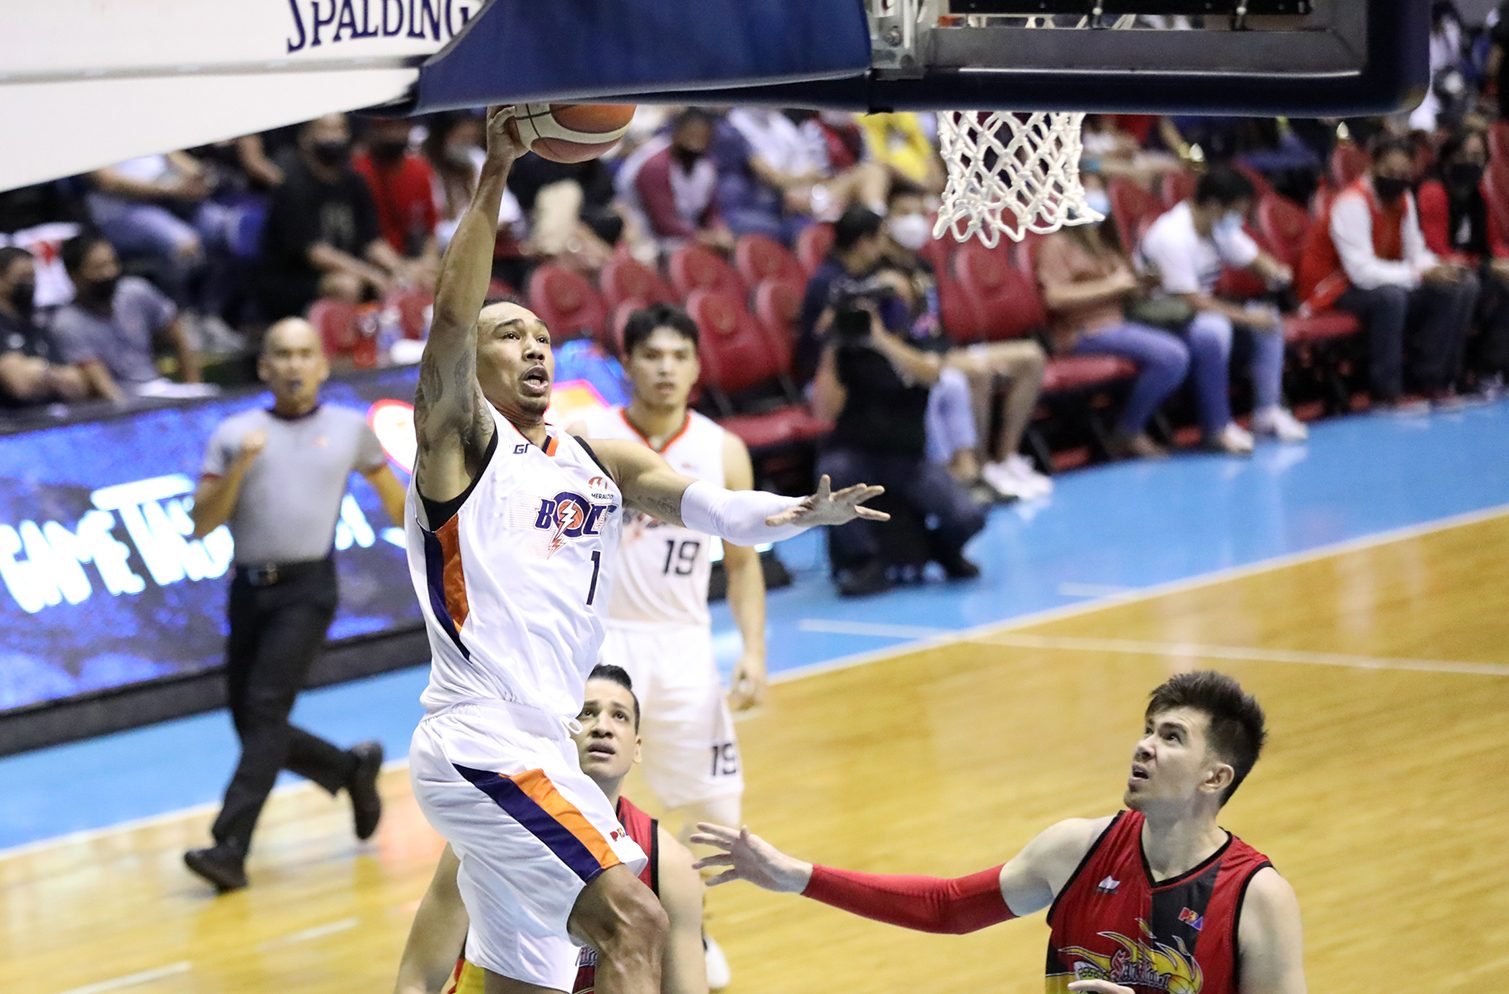 PBA on X: FINAL: 114-98 in favor of the Meralco Bolts! Best